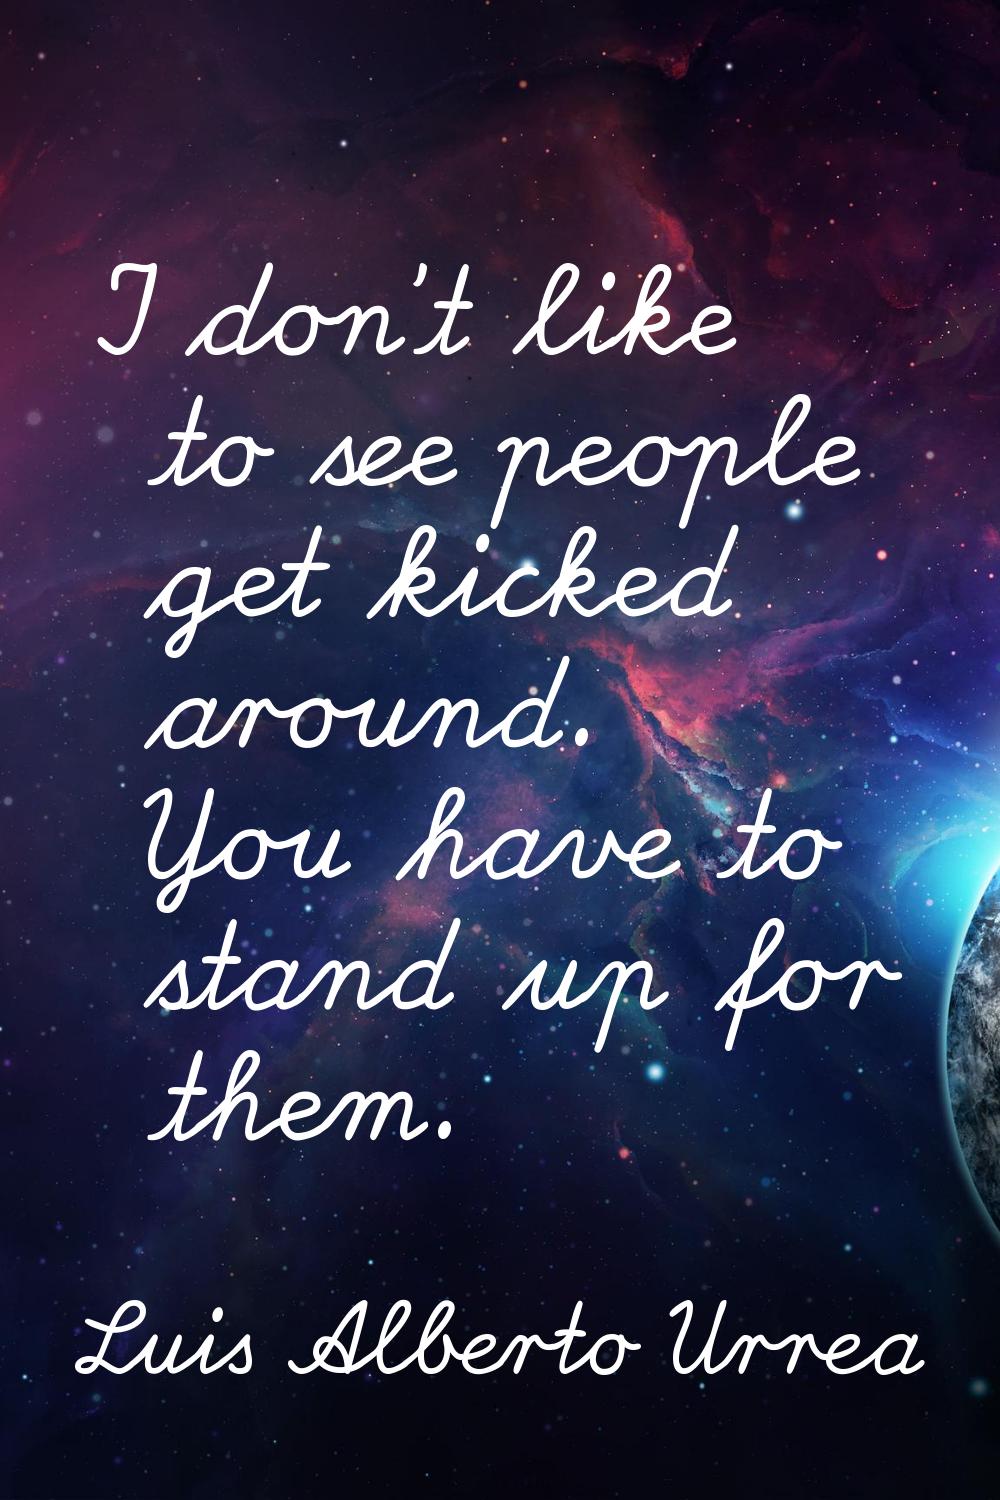 I don't like to see people get kicked around. You have to stand up for them.